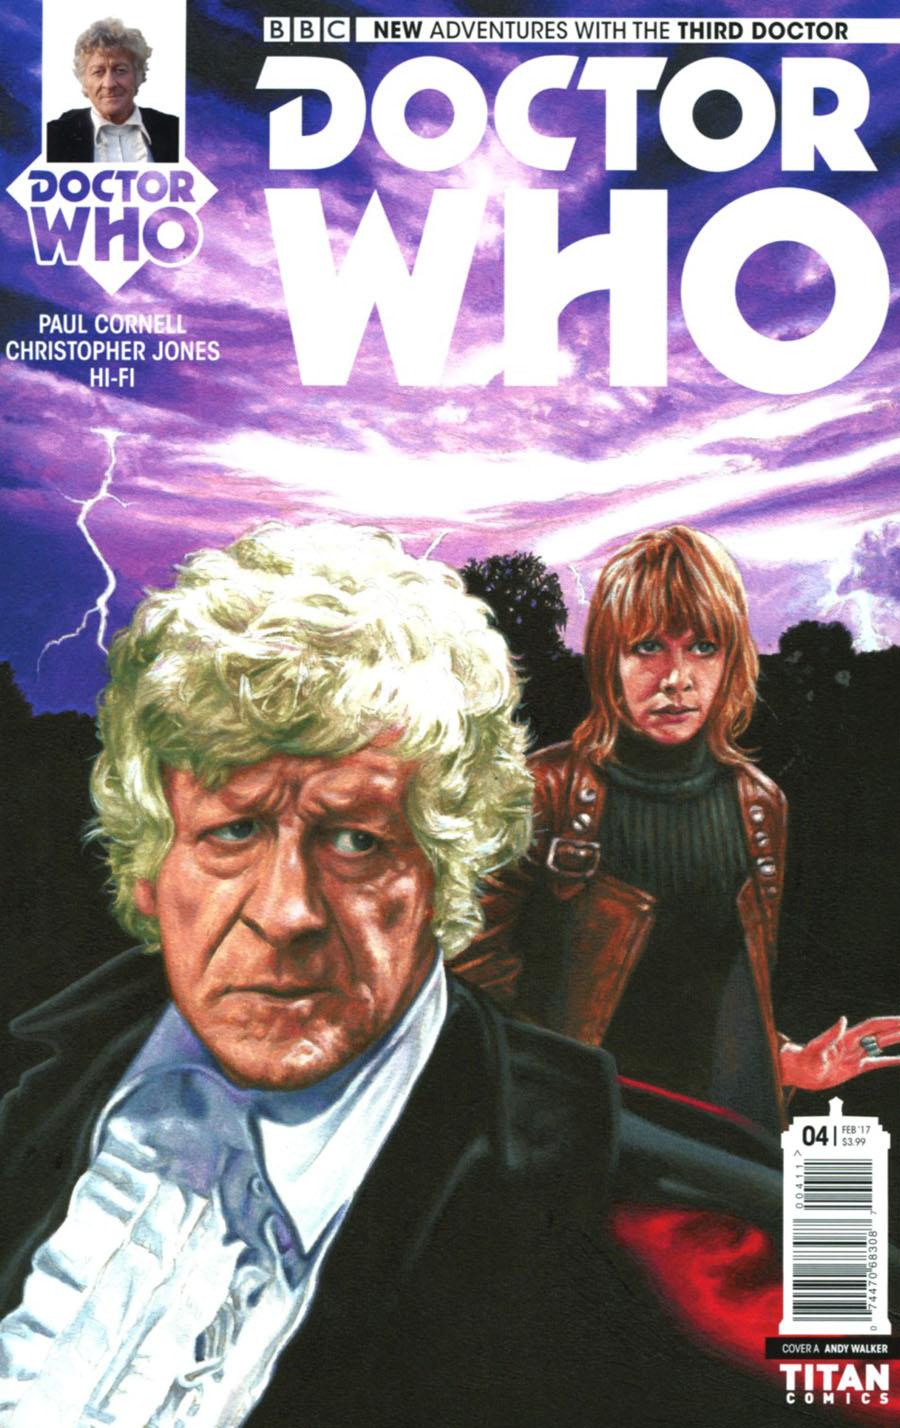 Doctor Who 3rd Doctor Vol. 1 #4